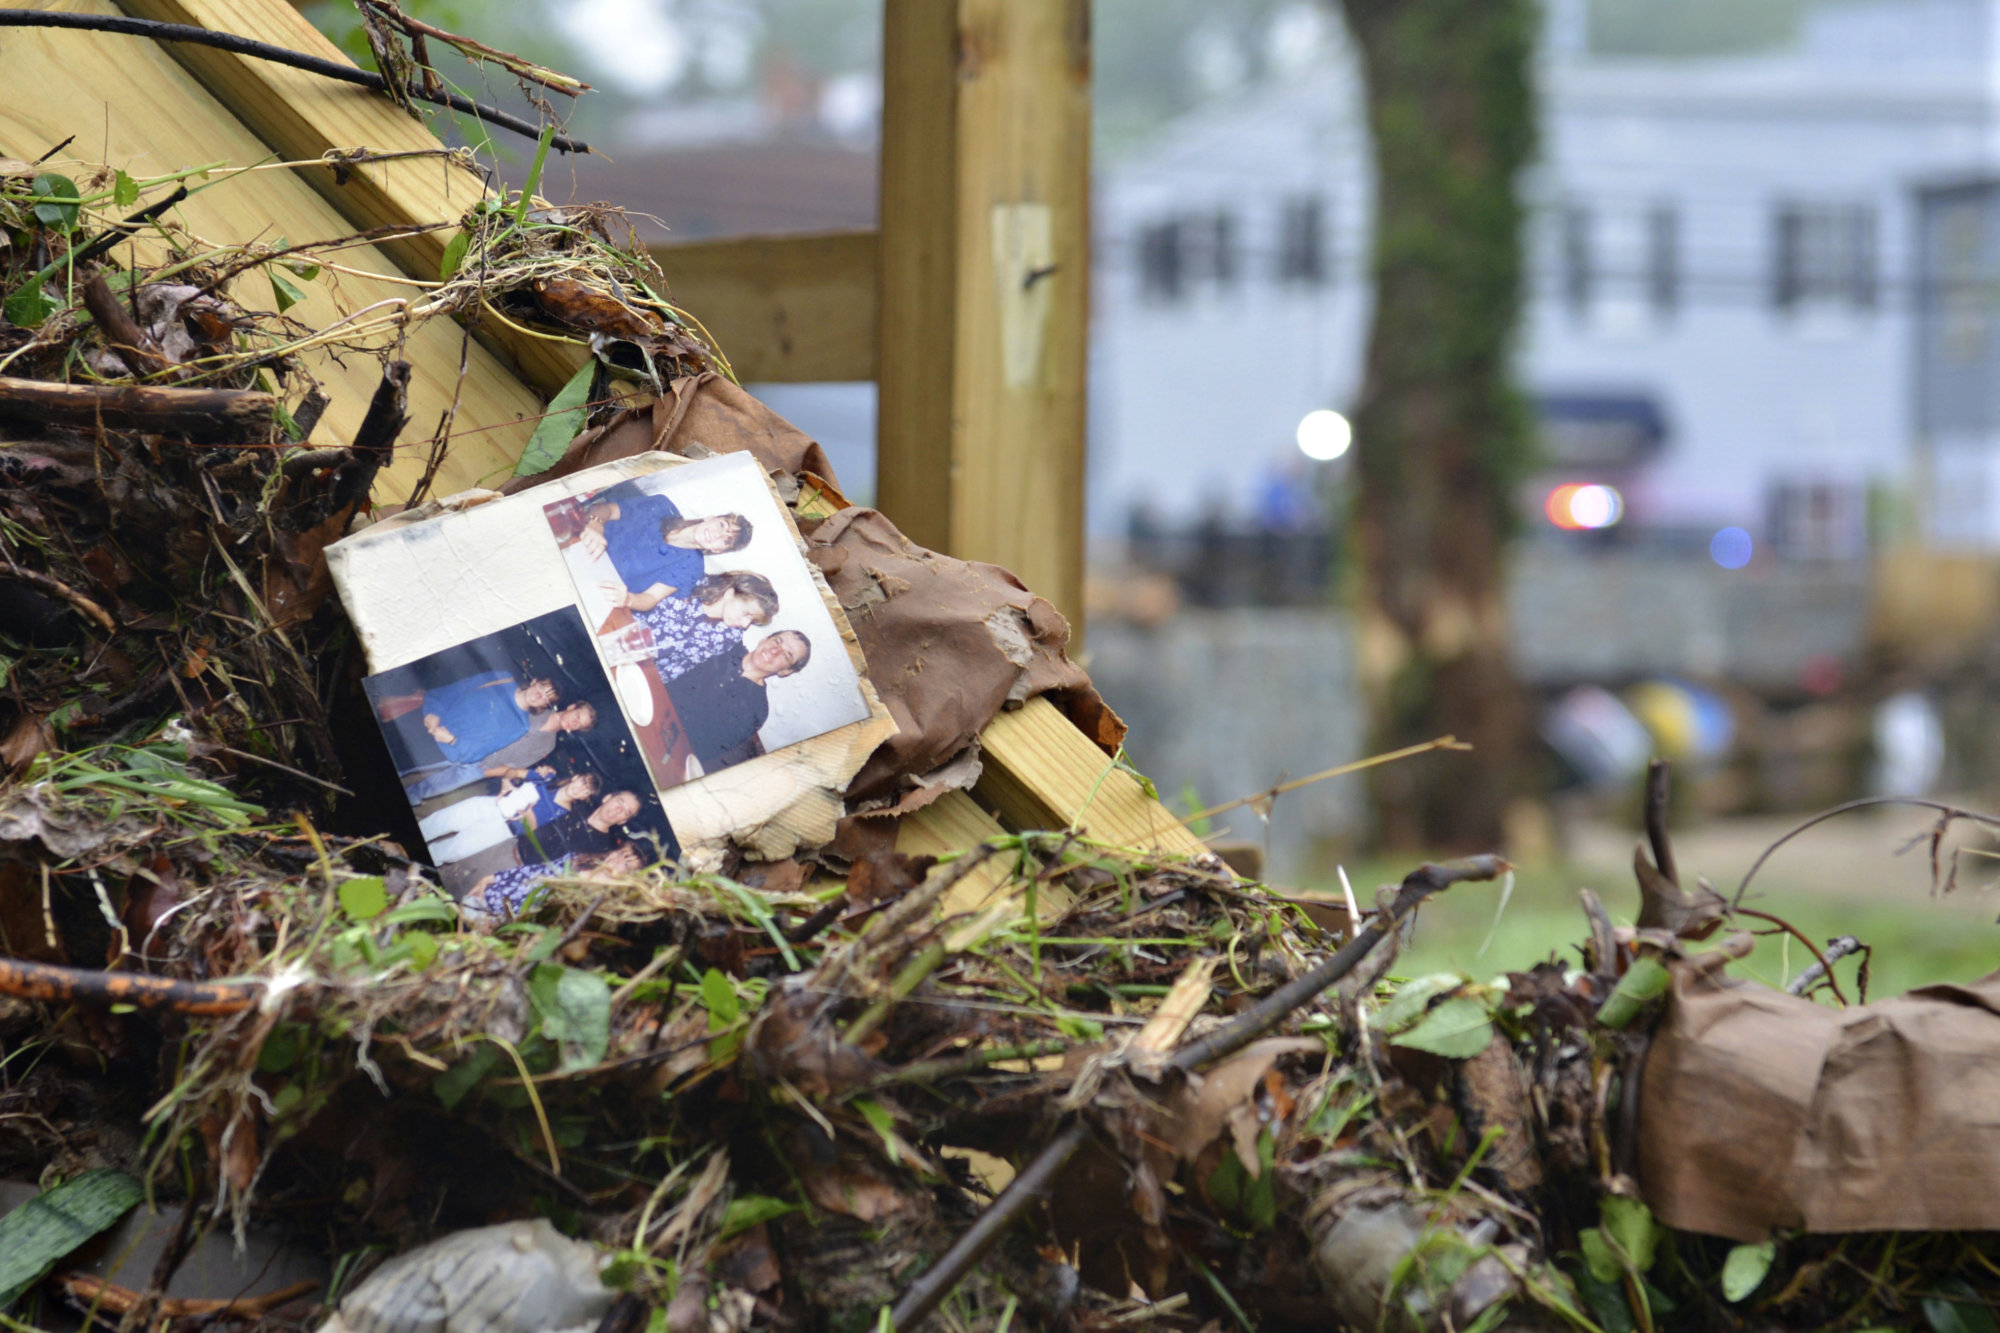 Family photos rest among debris after flash flooding in Ellicott City, Md., Monday, May 28, 2018. Sunday's destructive flooding left the former mill town heartbroken as it had bounded back from another destructive storm less than two years ago. (AP Photo/David McFadden)